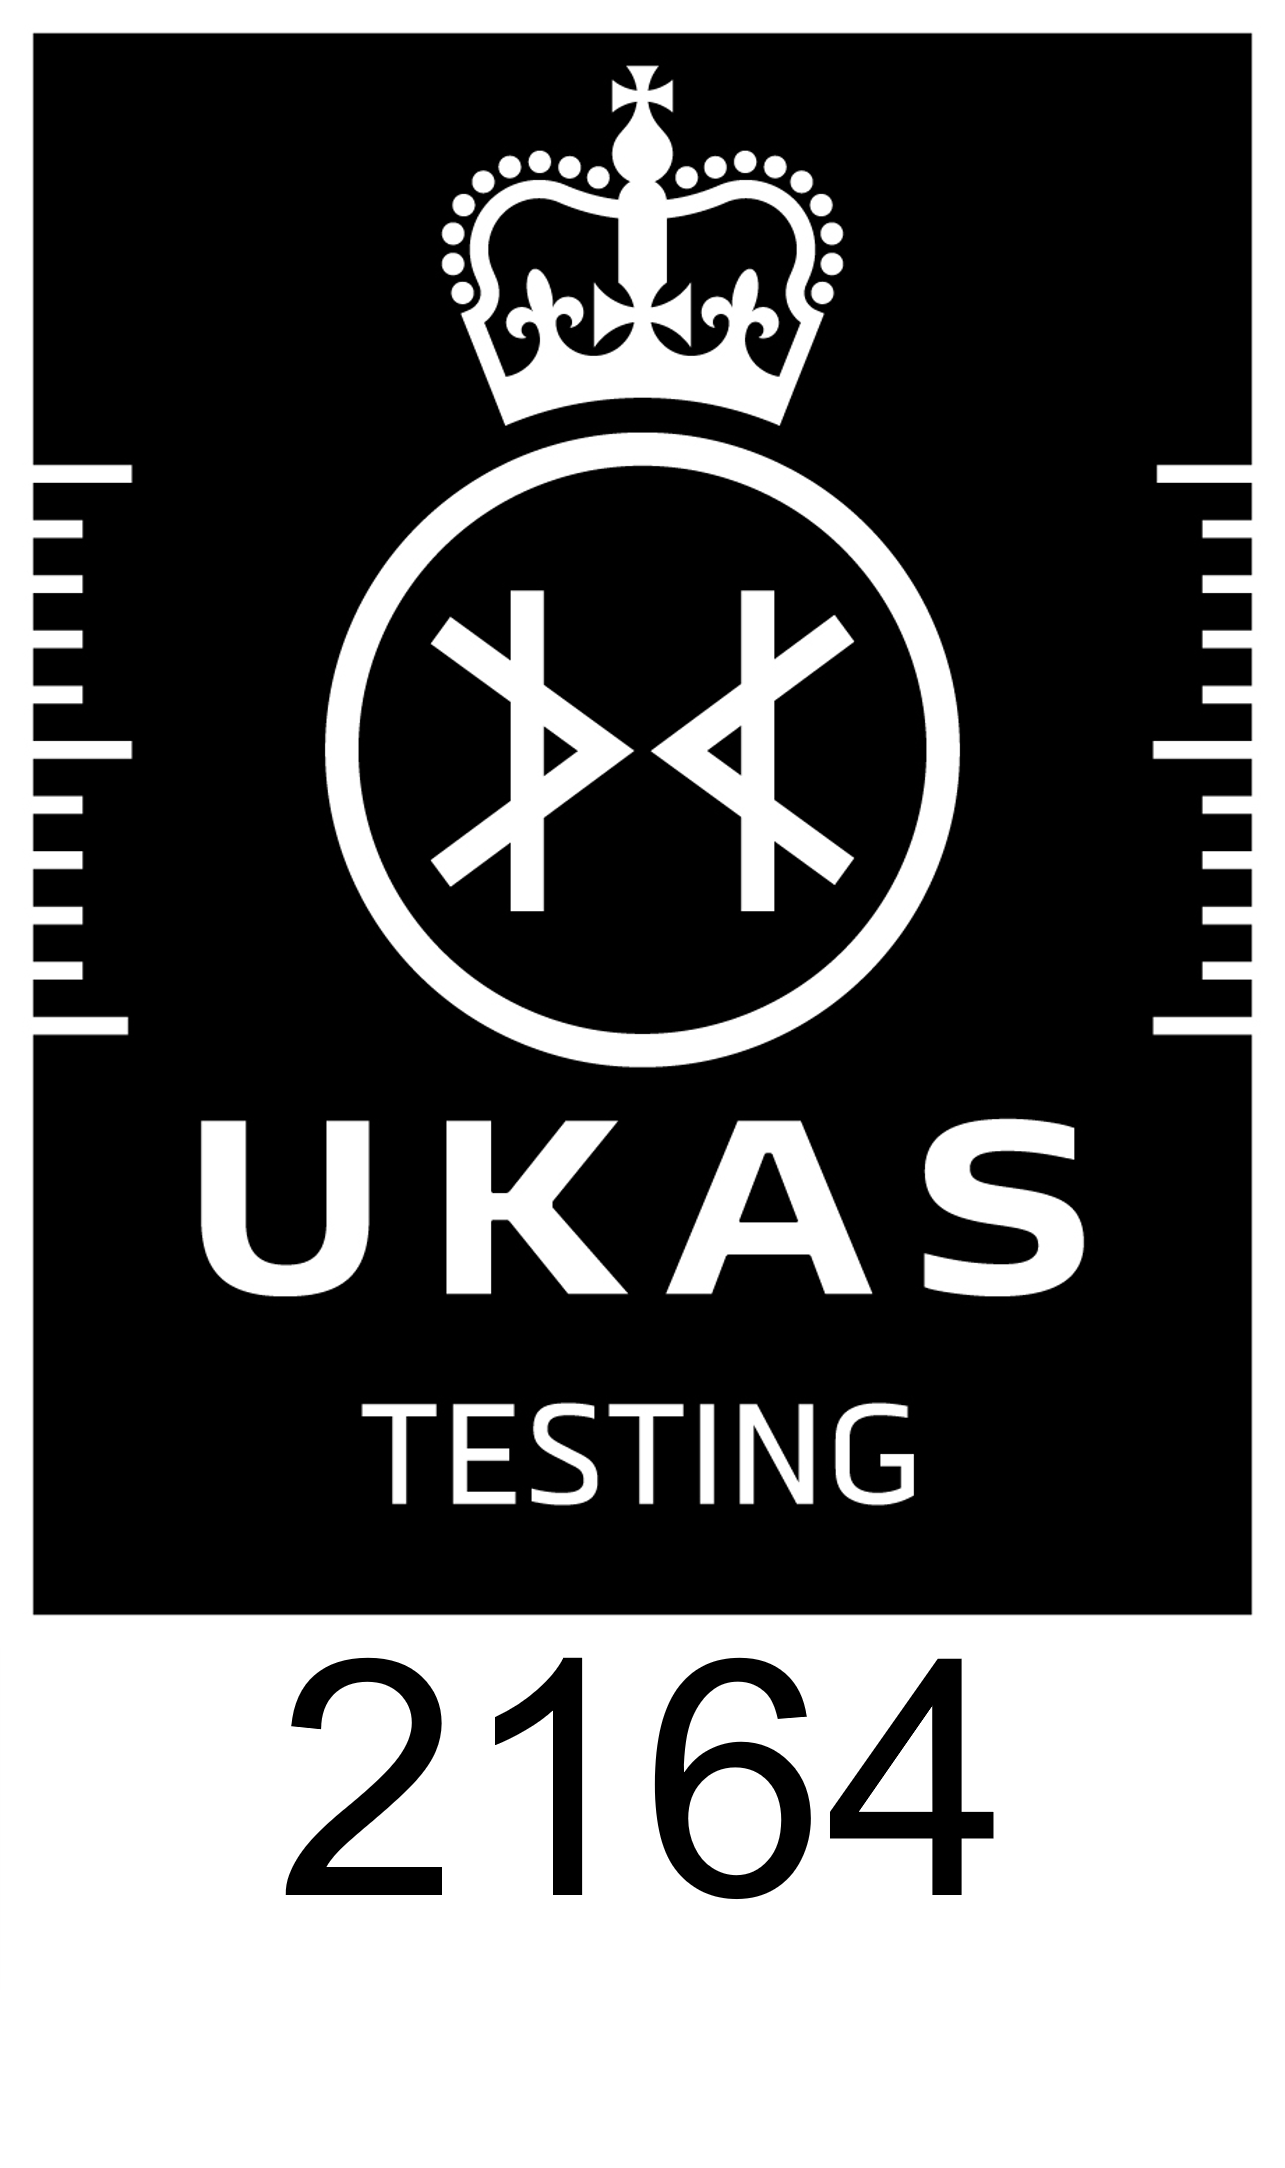 Ukas Logo With Number